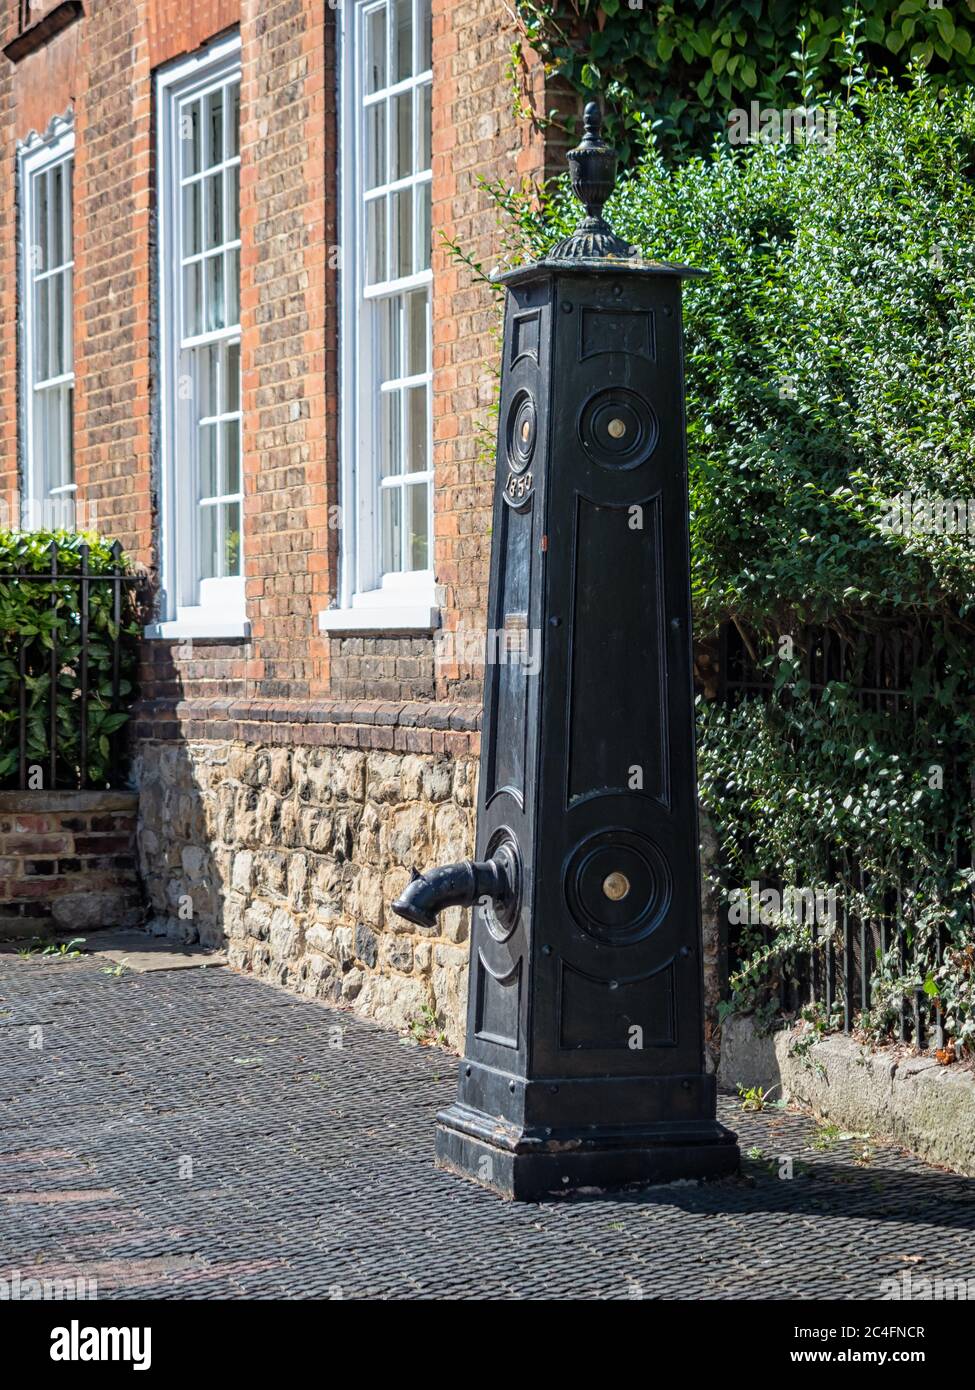 WEST MALLING, KENT, UK - SEPTEMBER 13, 2019:  Victorian Water Pump in the High Street Stock Photo